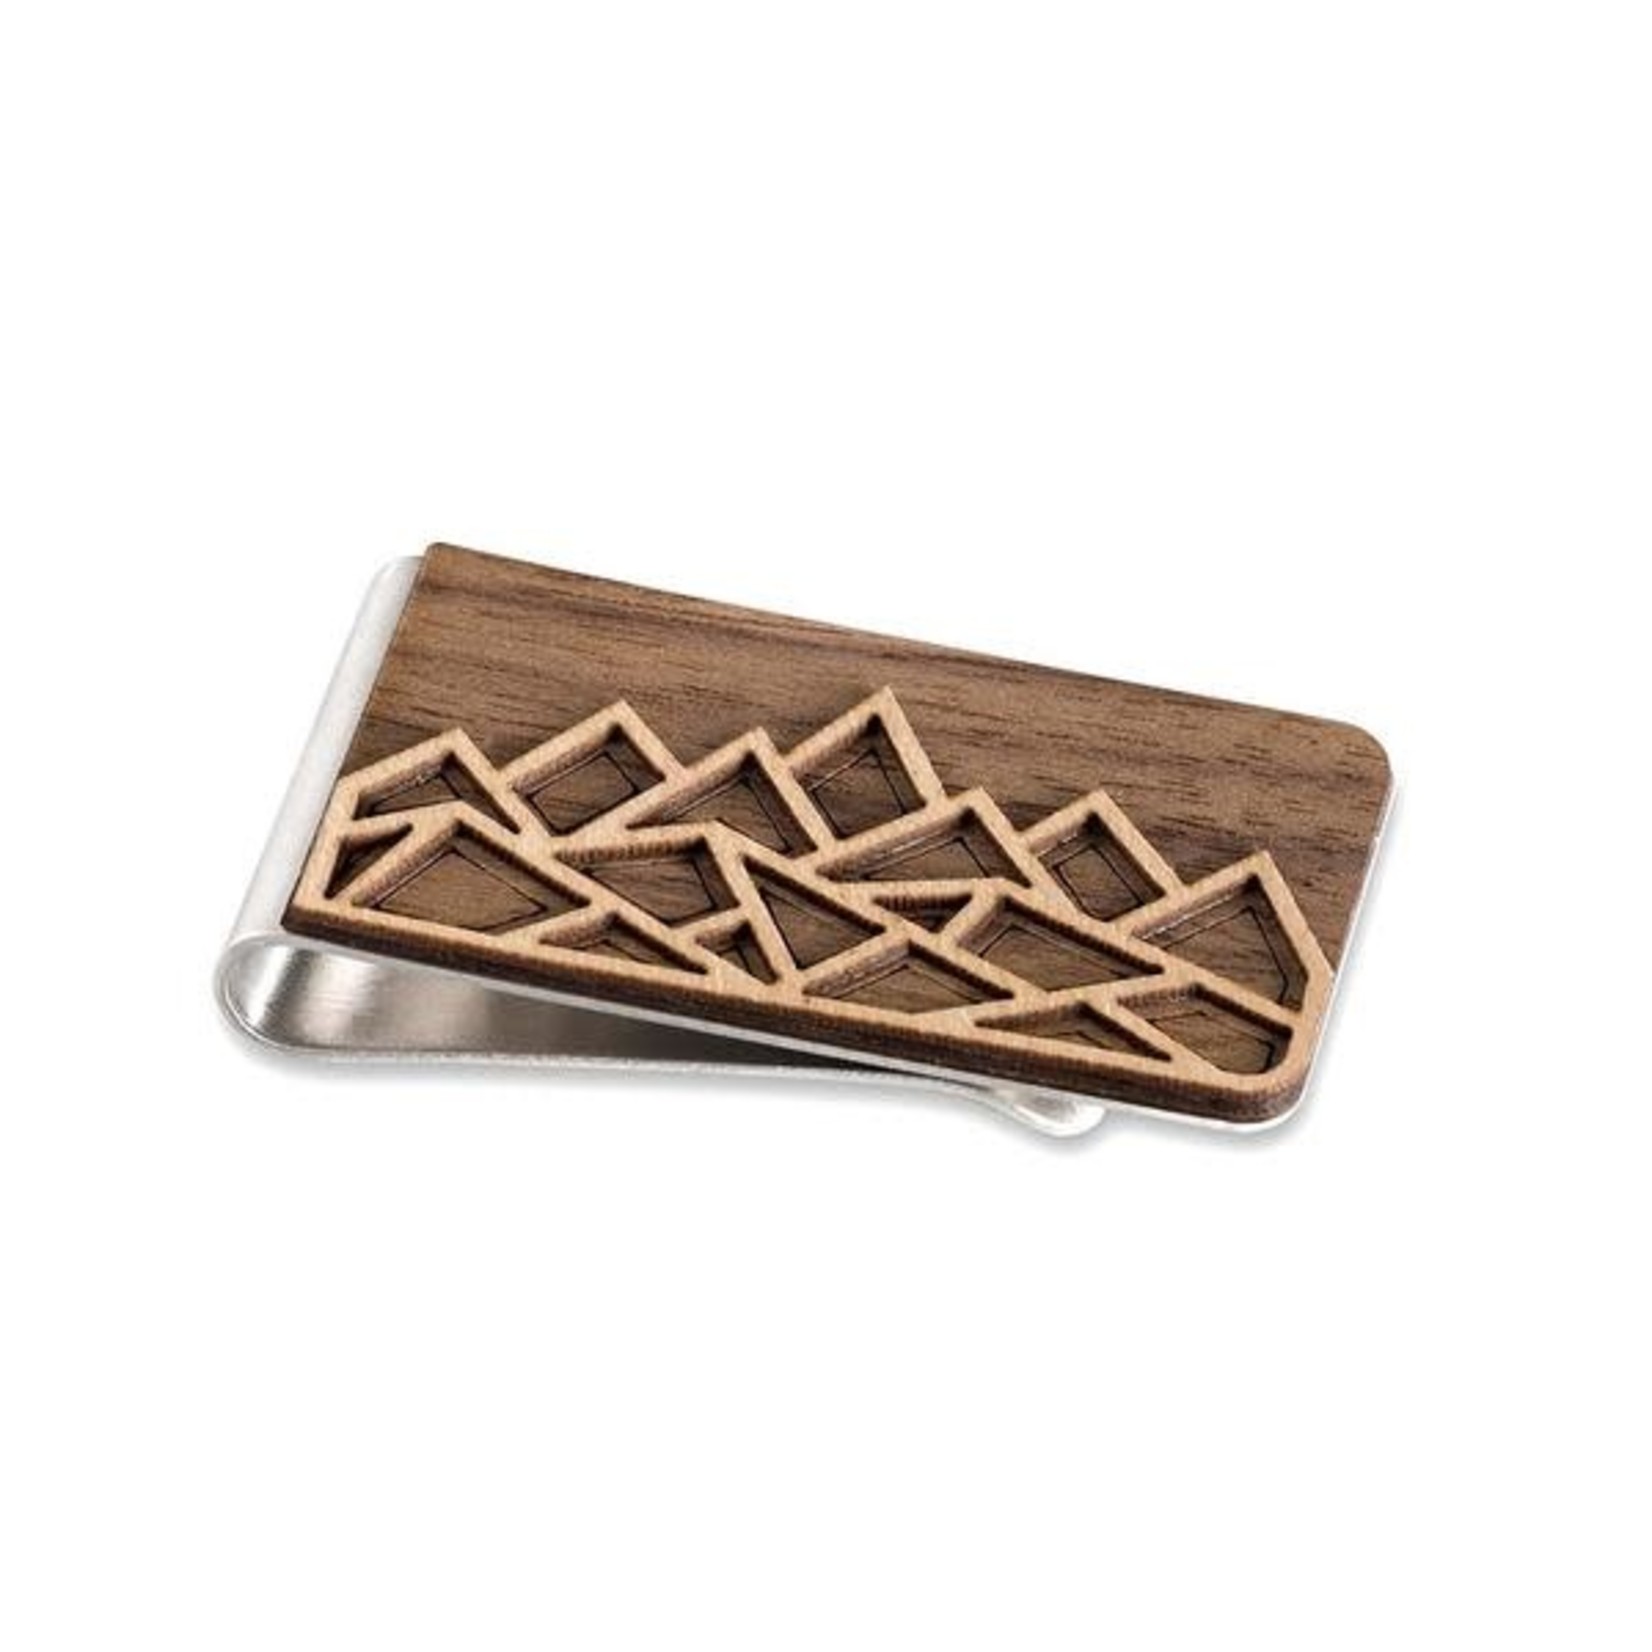 TREELINE AND TIDE MONEY CLIP - MOUNTAINS